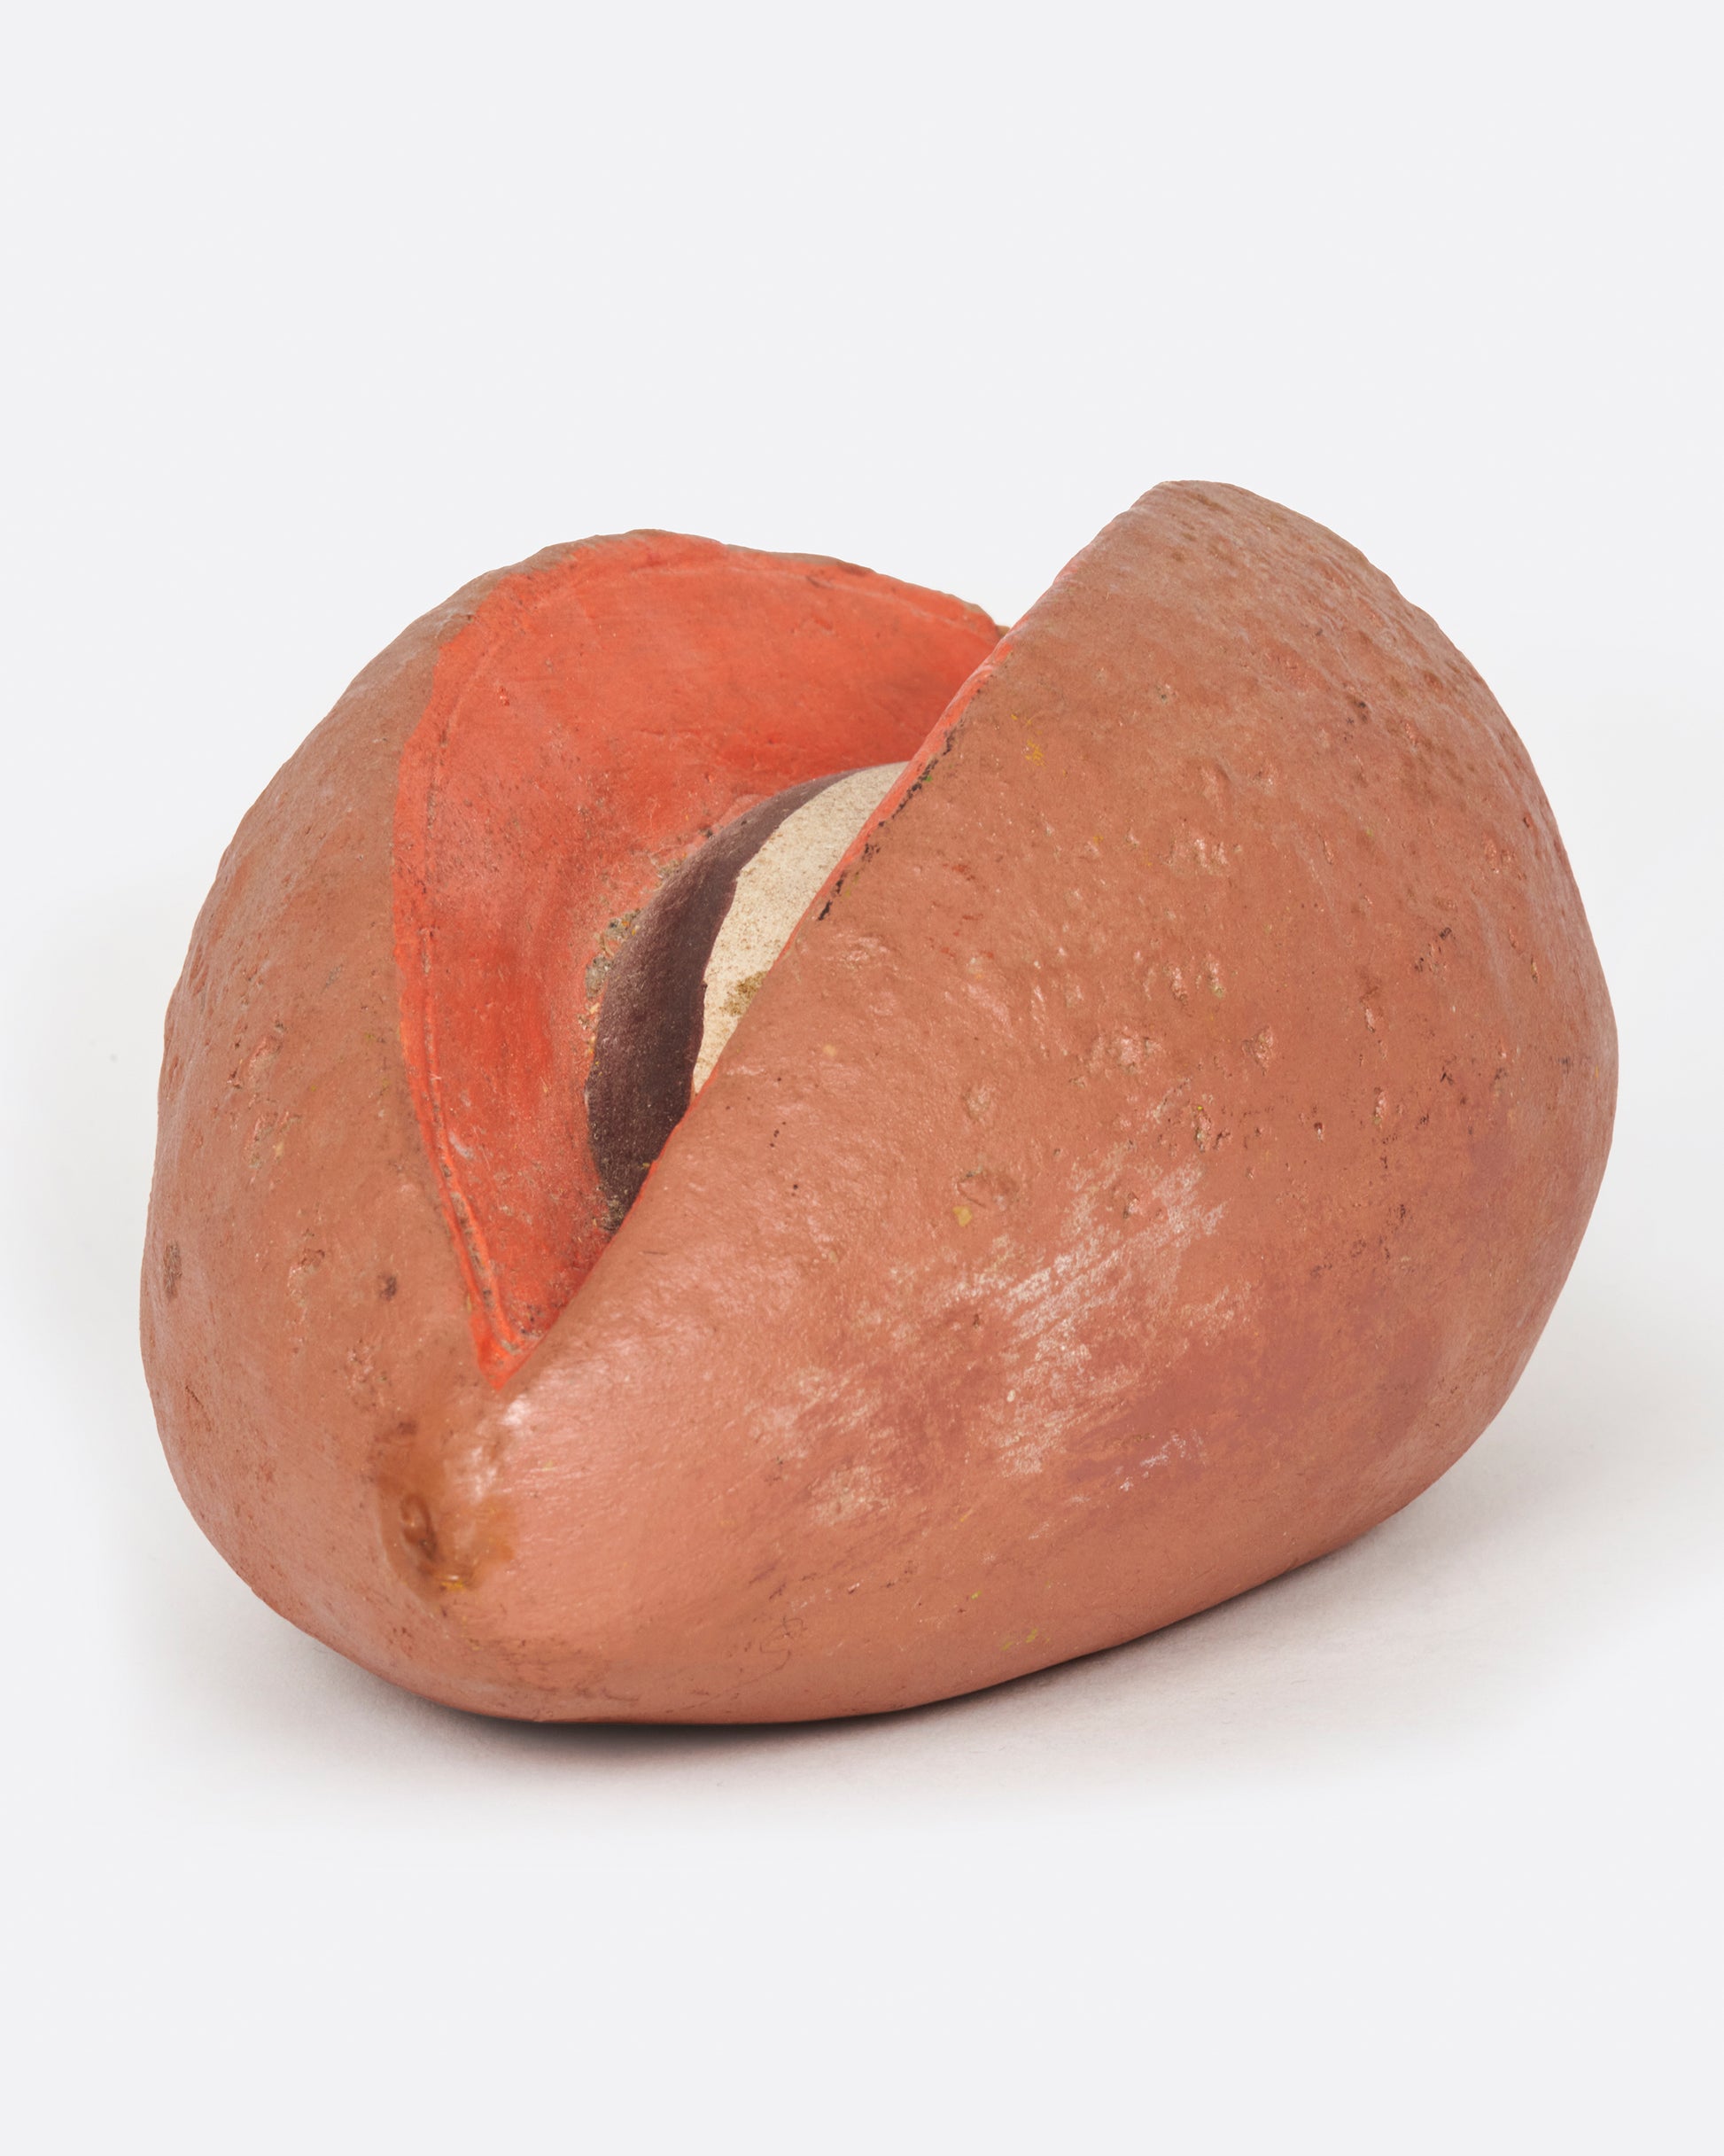 A vintage handmade mamey bank from 1940's Mexico.